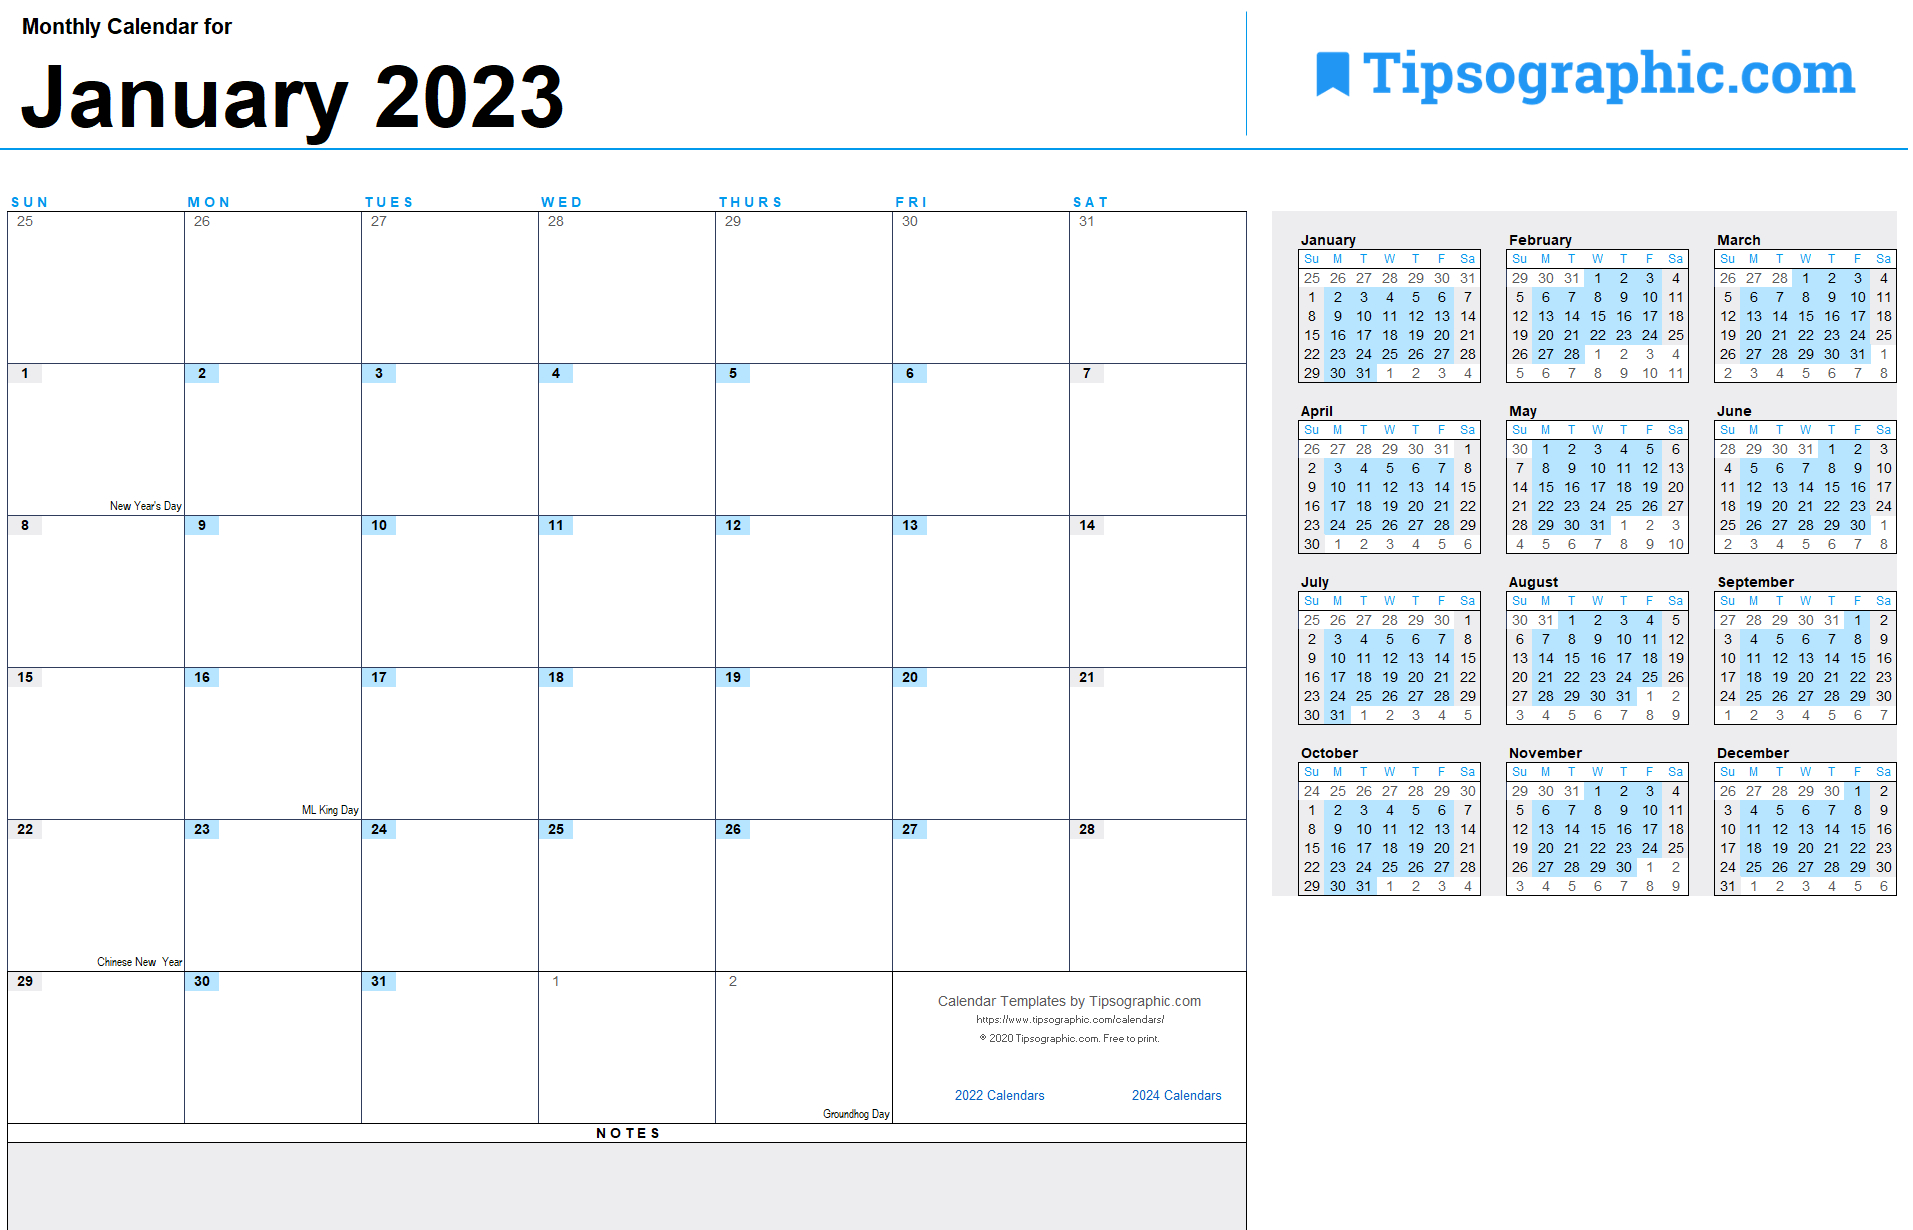 Download The 2023 Monthly Calendar | Tipsographic How To Print A Monthly Calendar Powerpoint